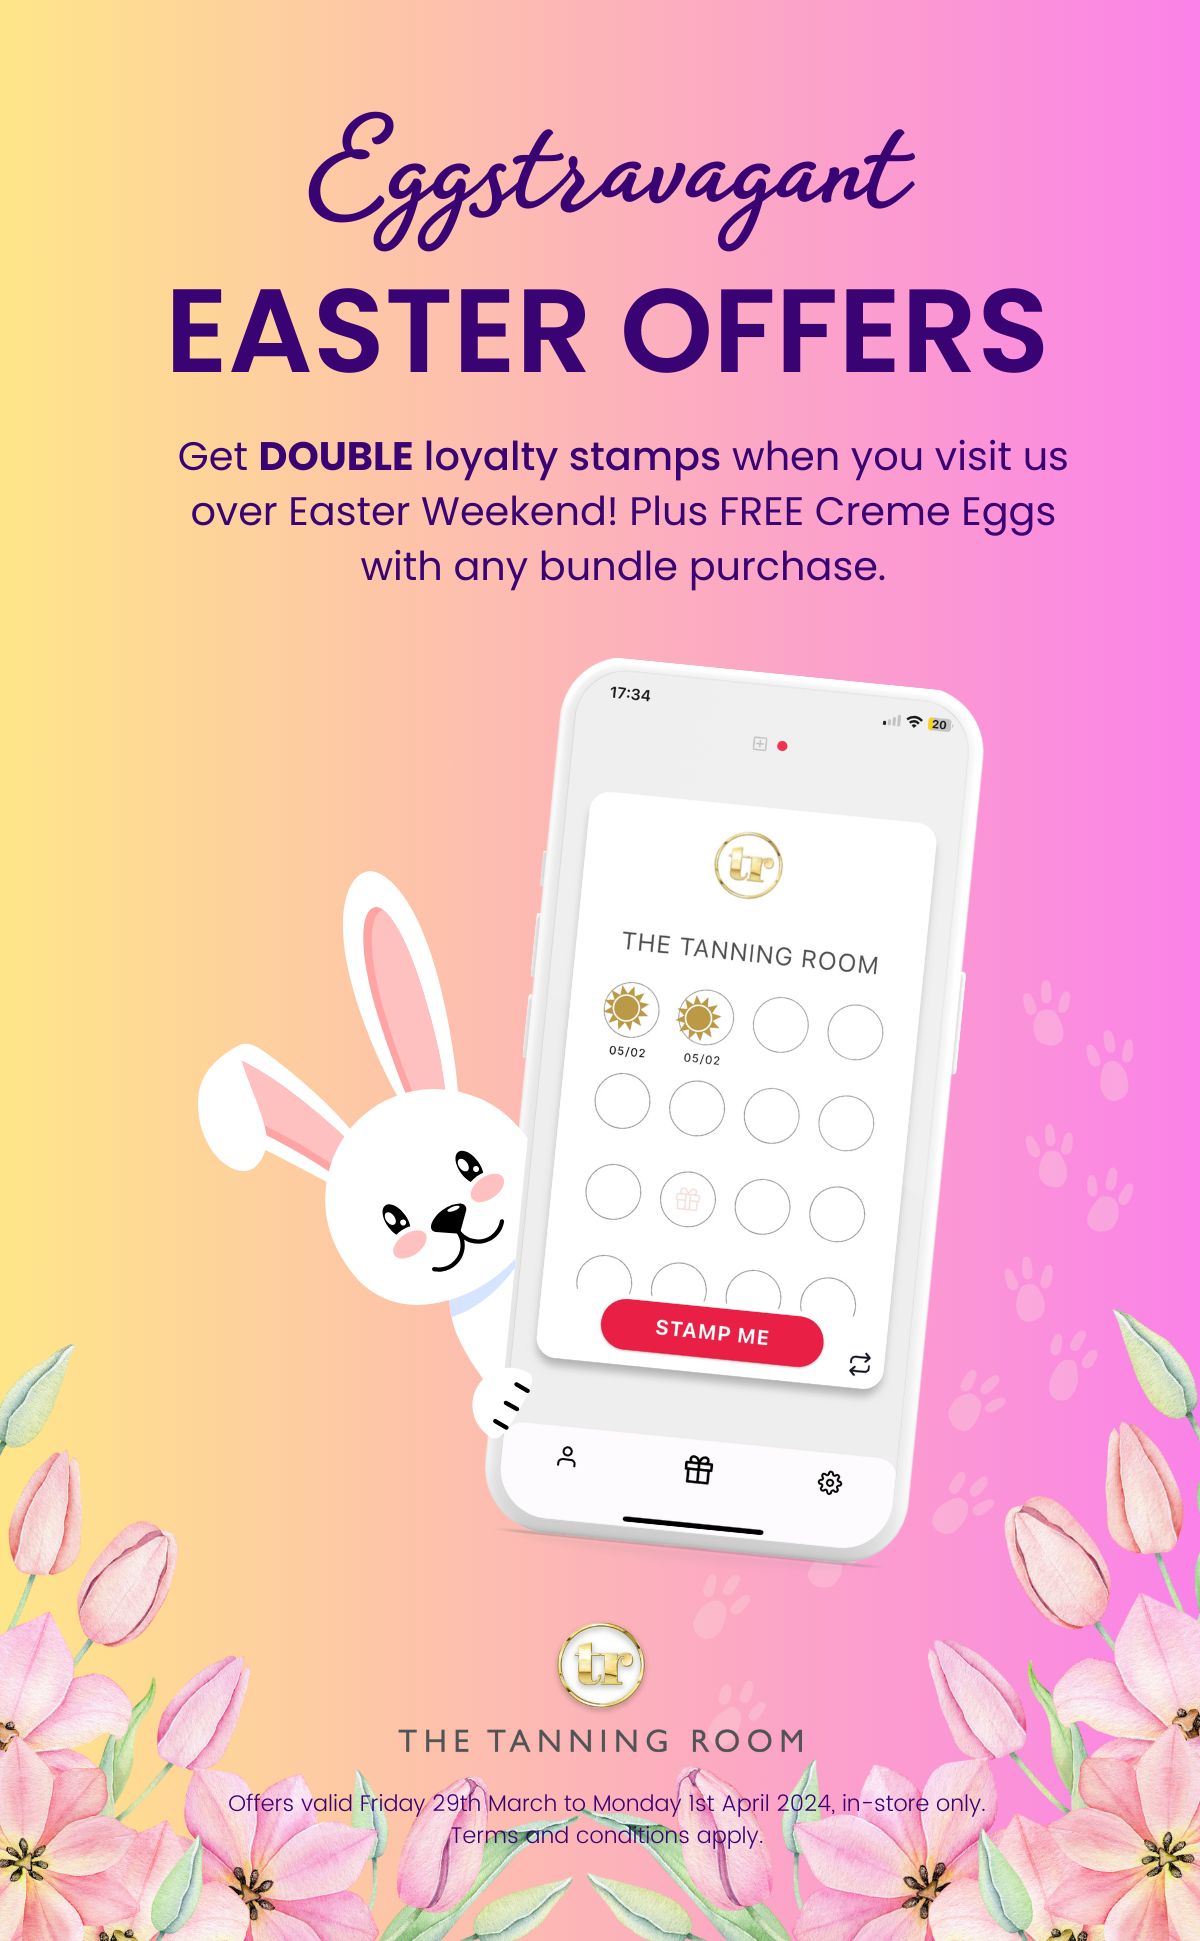 Eggstravagant Easter Offers - get DOUBLE loyalty stamps over Easter weekend